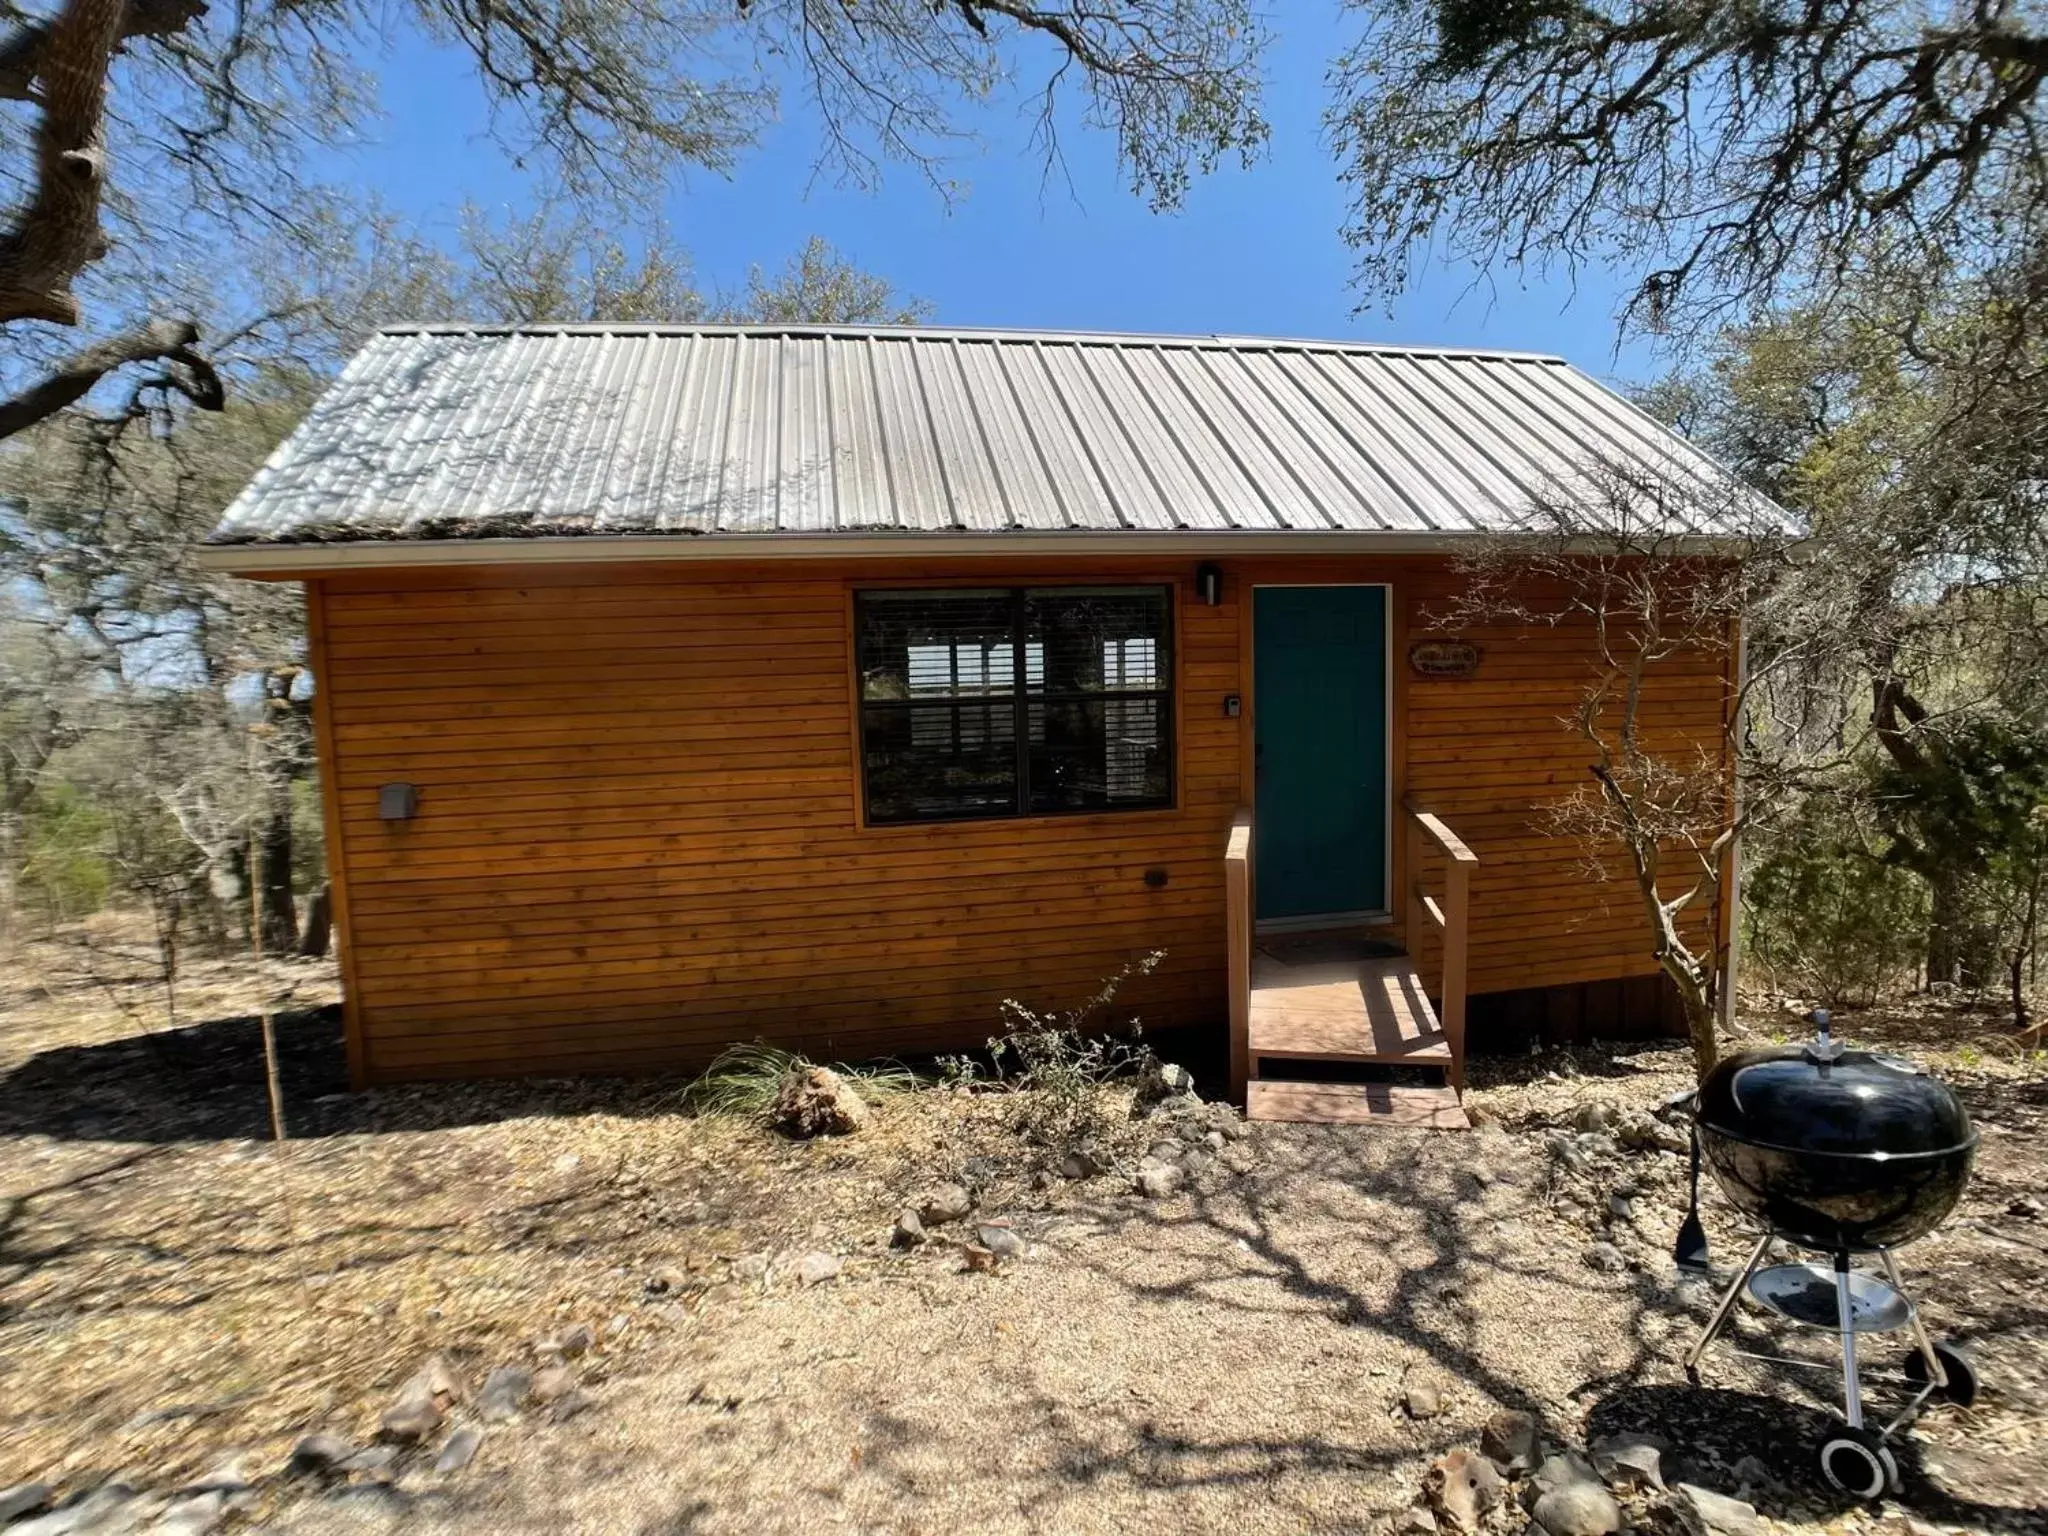 Property Building in Walnut Canyon Cabins